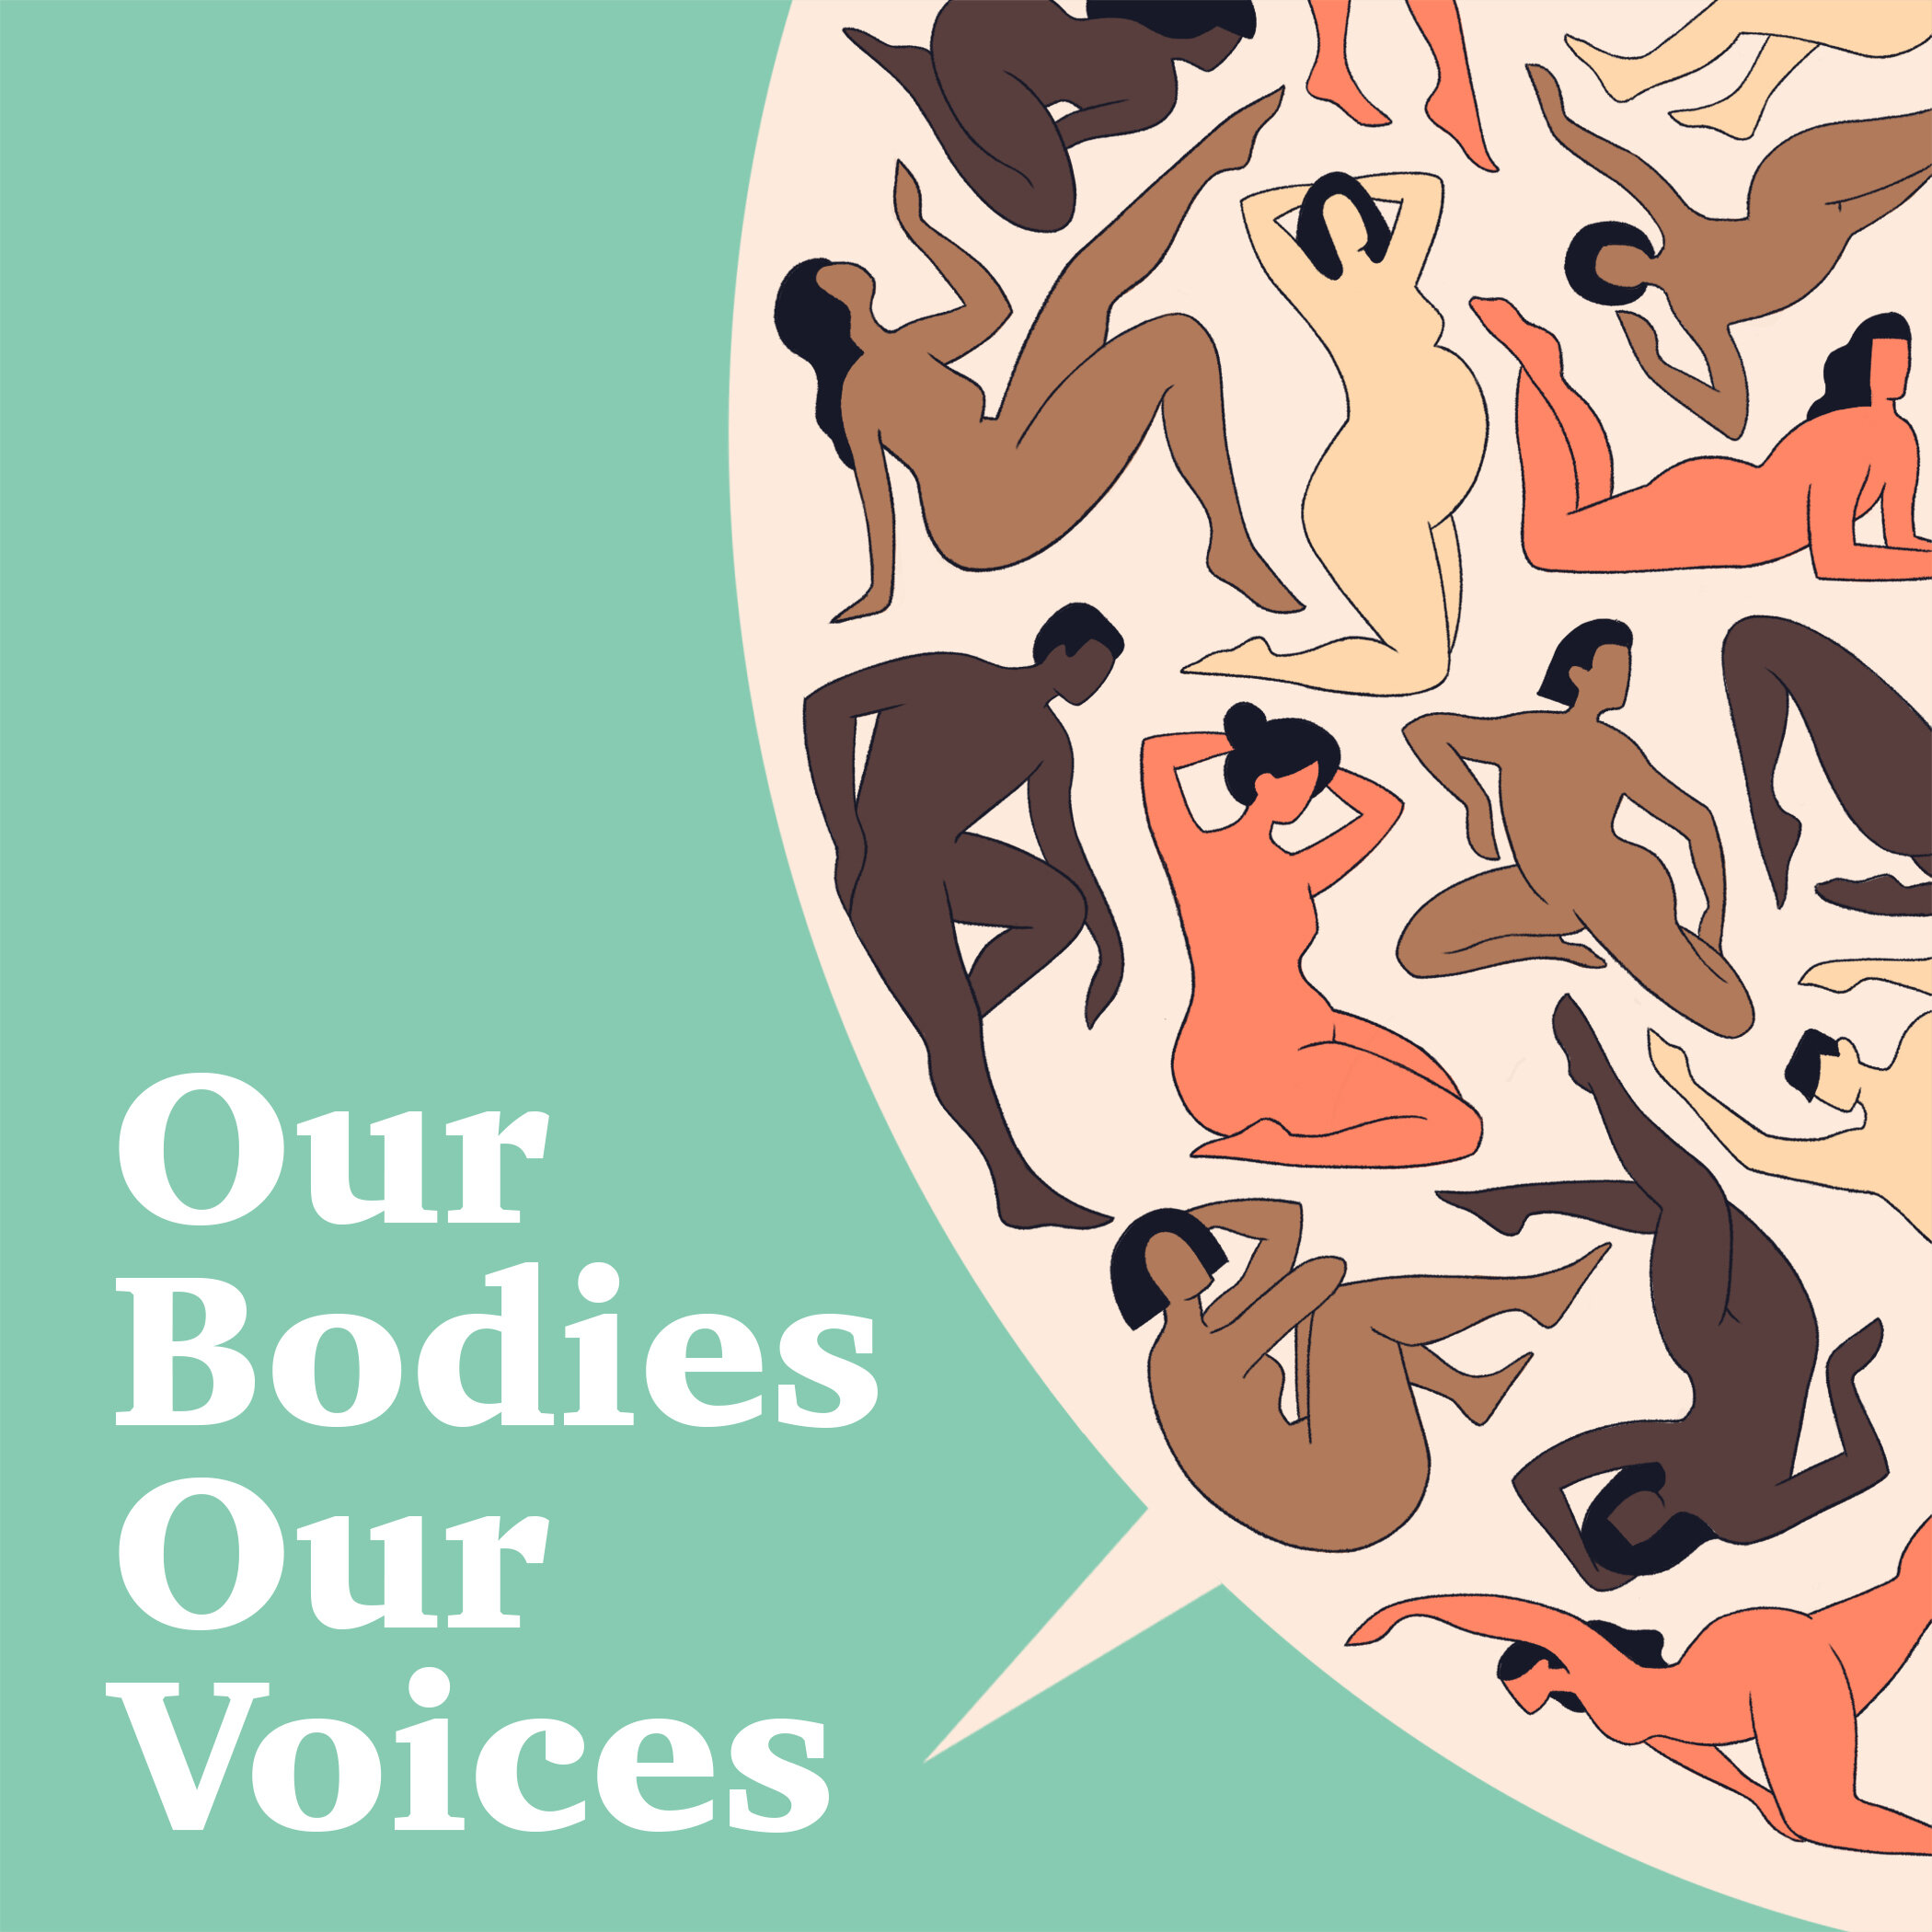  Podcast artwork and logo for Our Bodies Our Voices, a new podcast series from Rebecca Grubman and Joanna Miller 